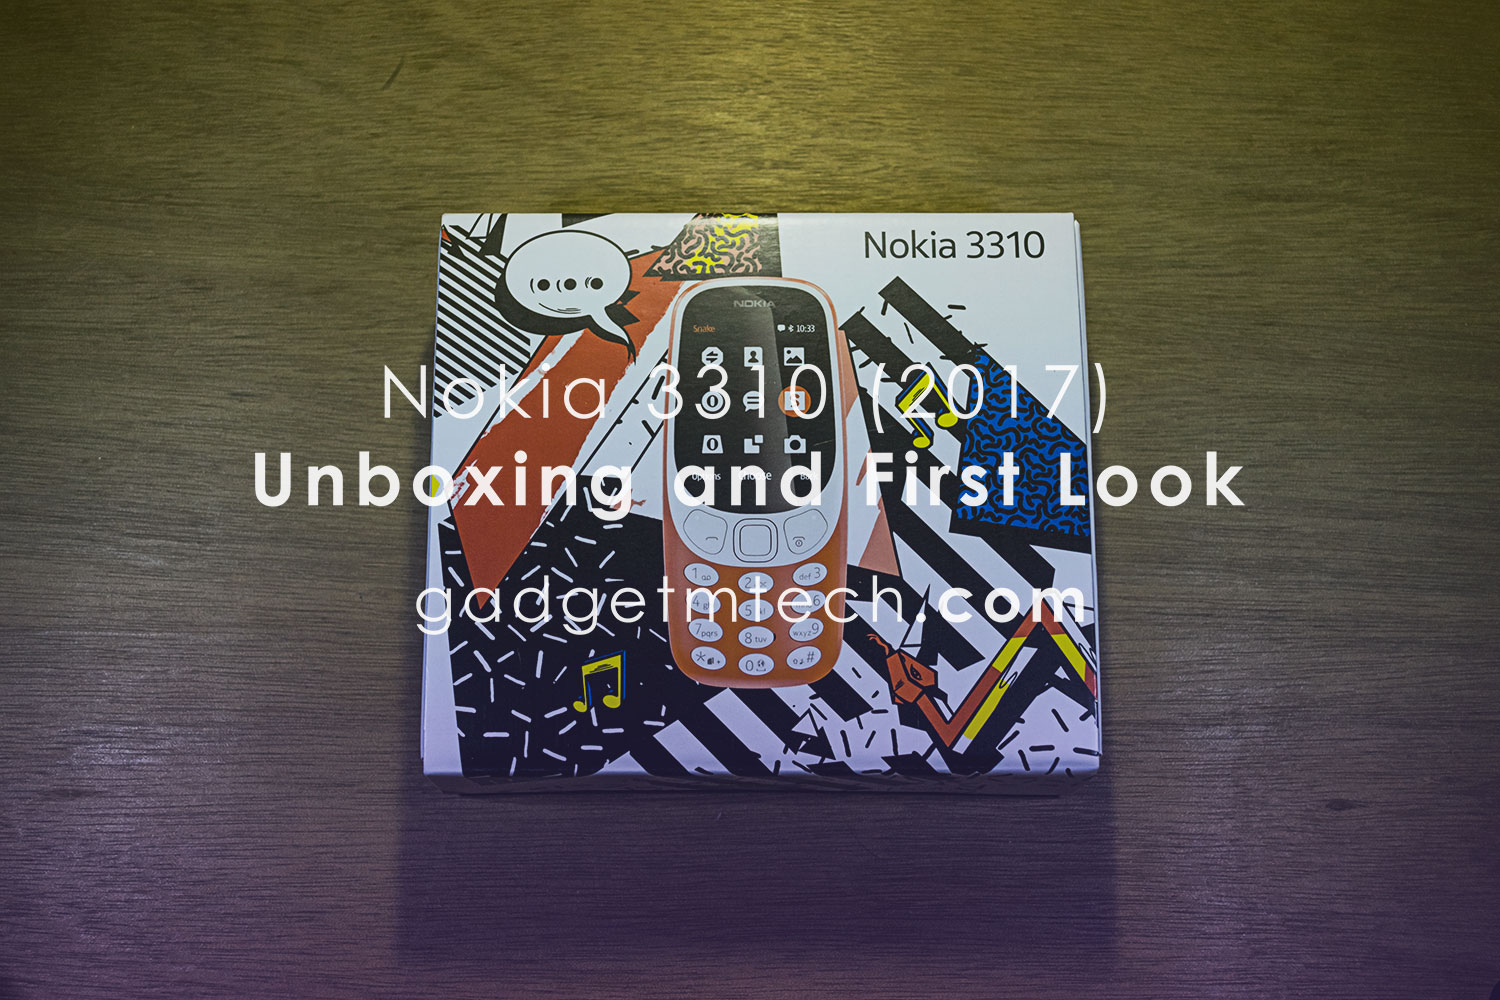 Nokia 3310 (2017) Unboxing and First Look!